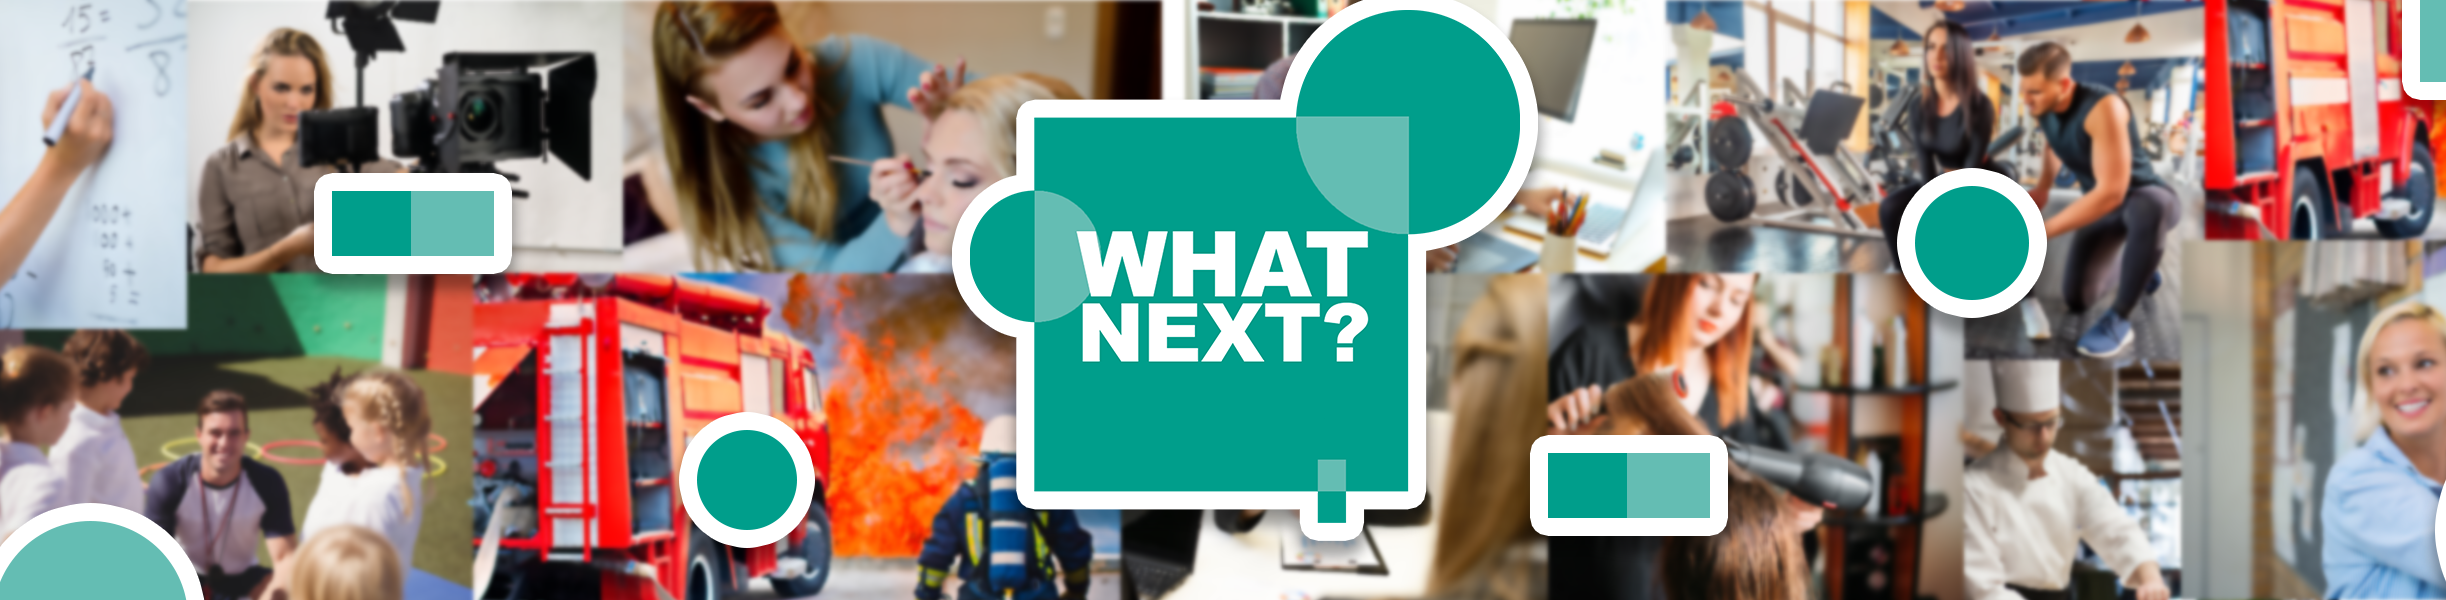 what next careers guidance event for school leavers